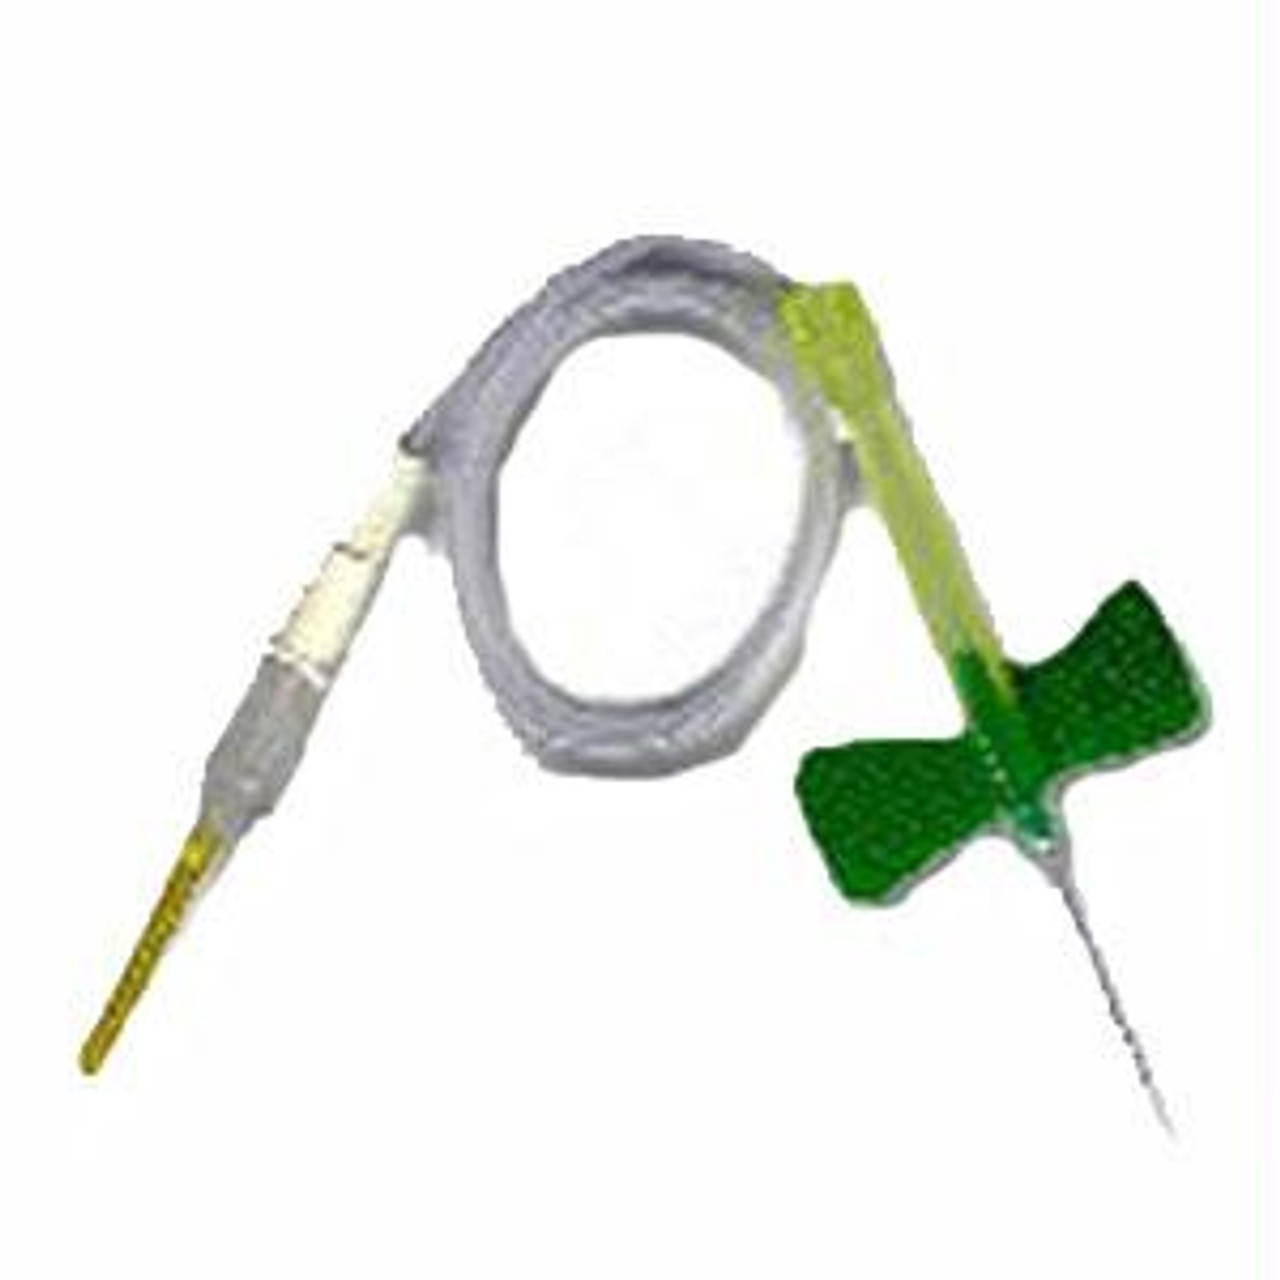  Blood Collection Set, 21G X 3/4, 12 Tubing, Green (50/Bx) :  Industrial & Scientific